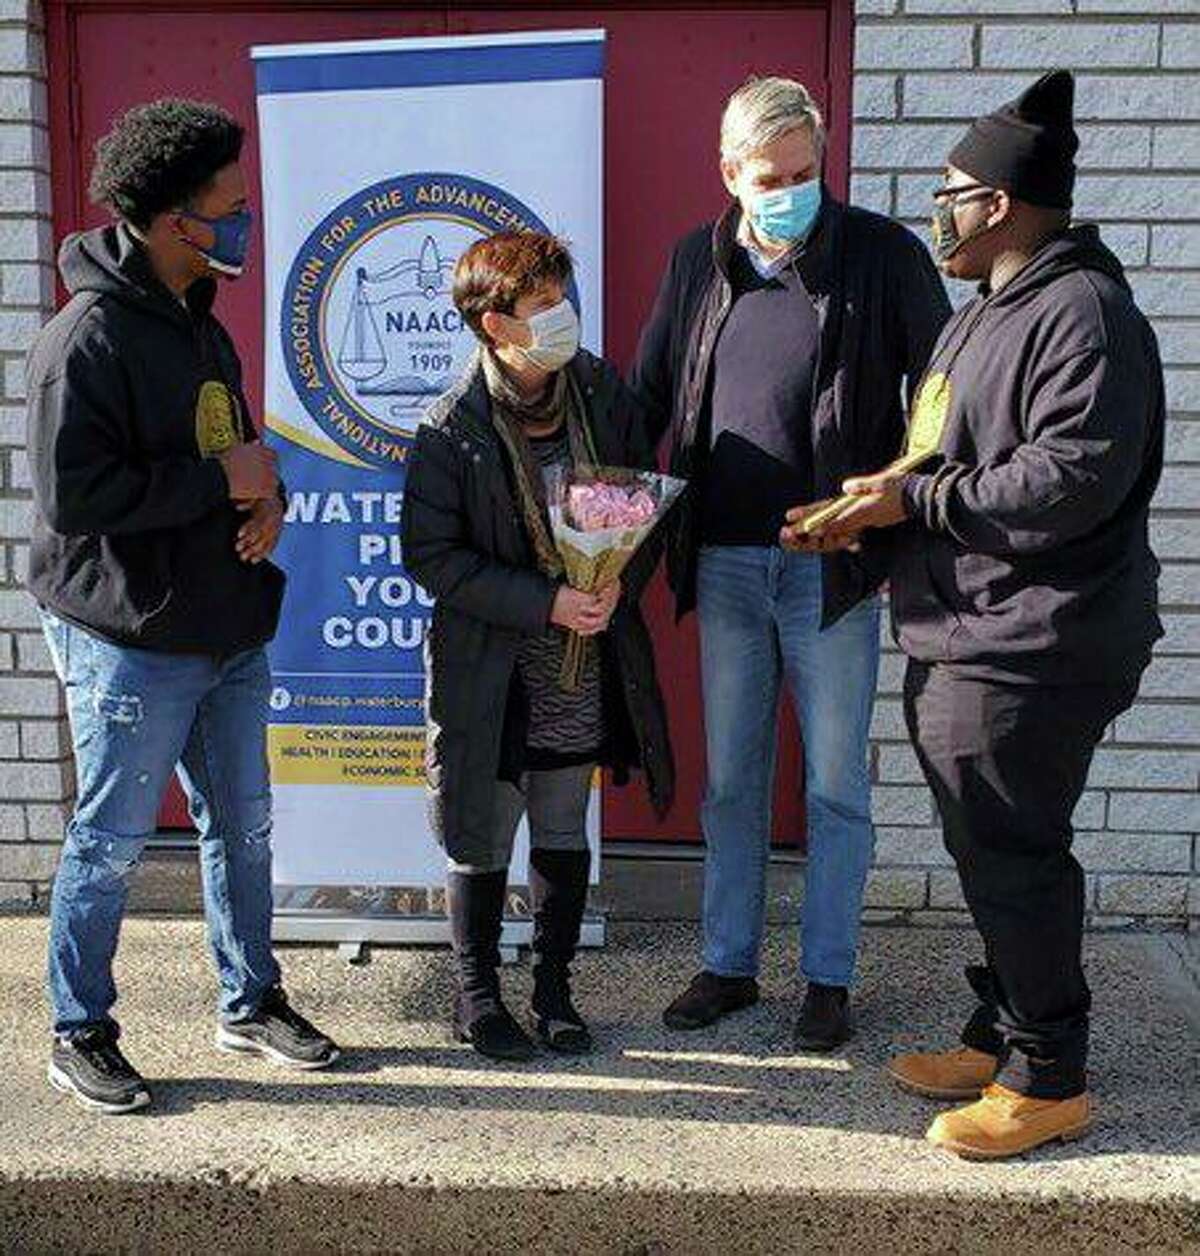 Amy and Bob Stefanowski, at center, received an award from the Waterbury NAACP Youth Corps on Sept. 9, 2021, for their volunteer work buying and distributing masks in the spring of 2020.